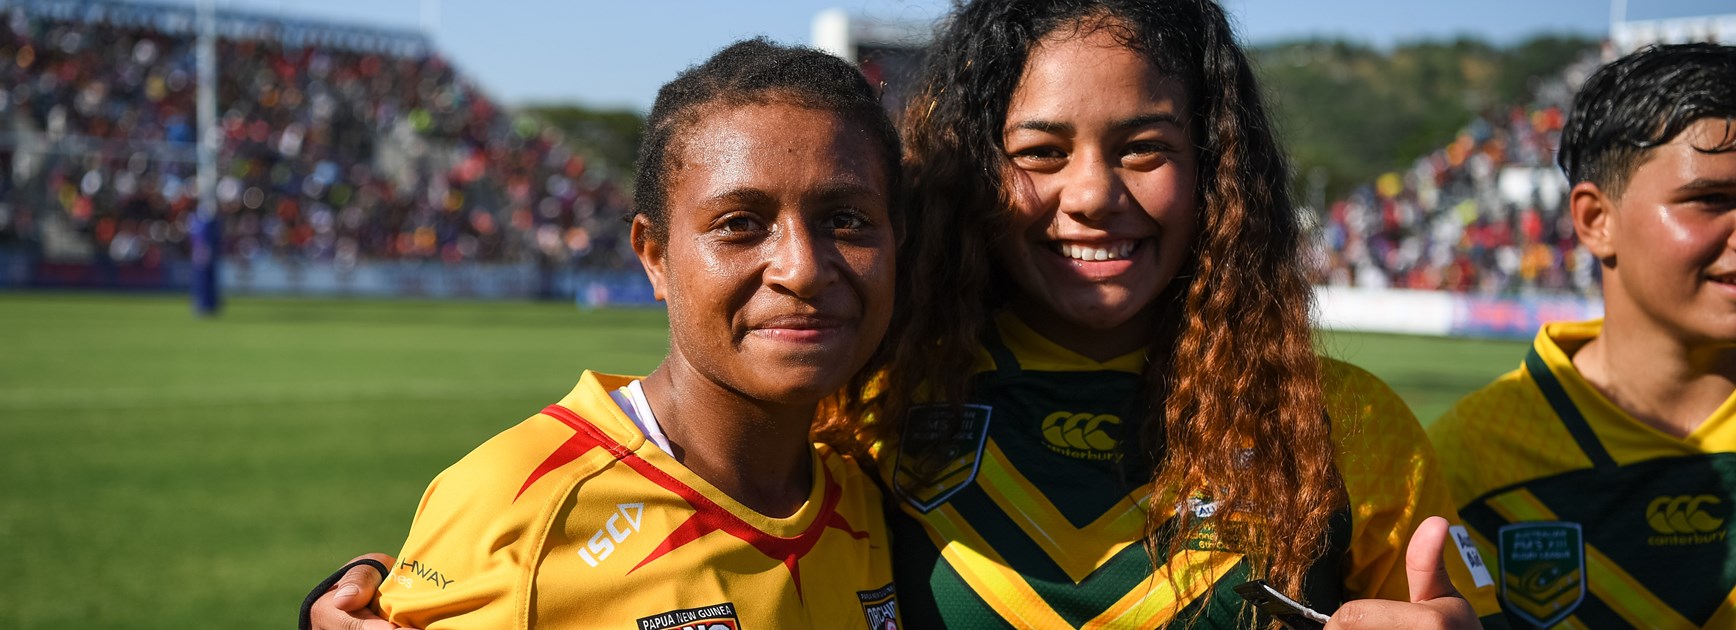 PM's XIII teams encouraging respect towards women in PNG